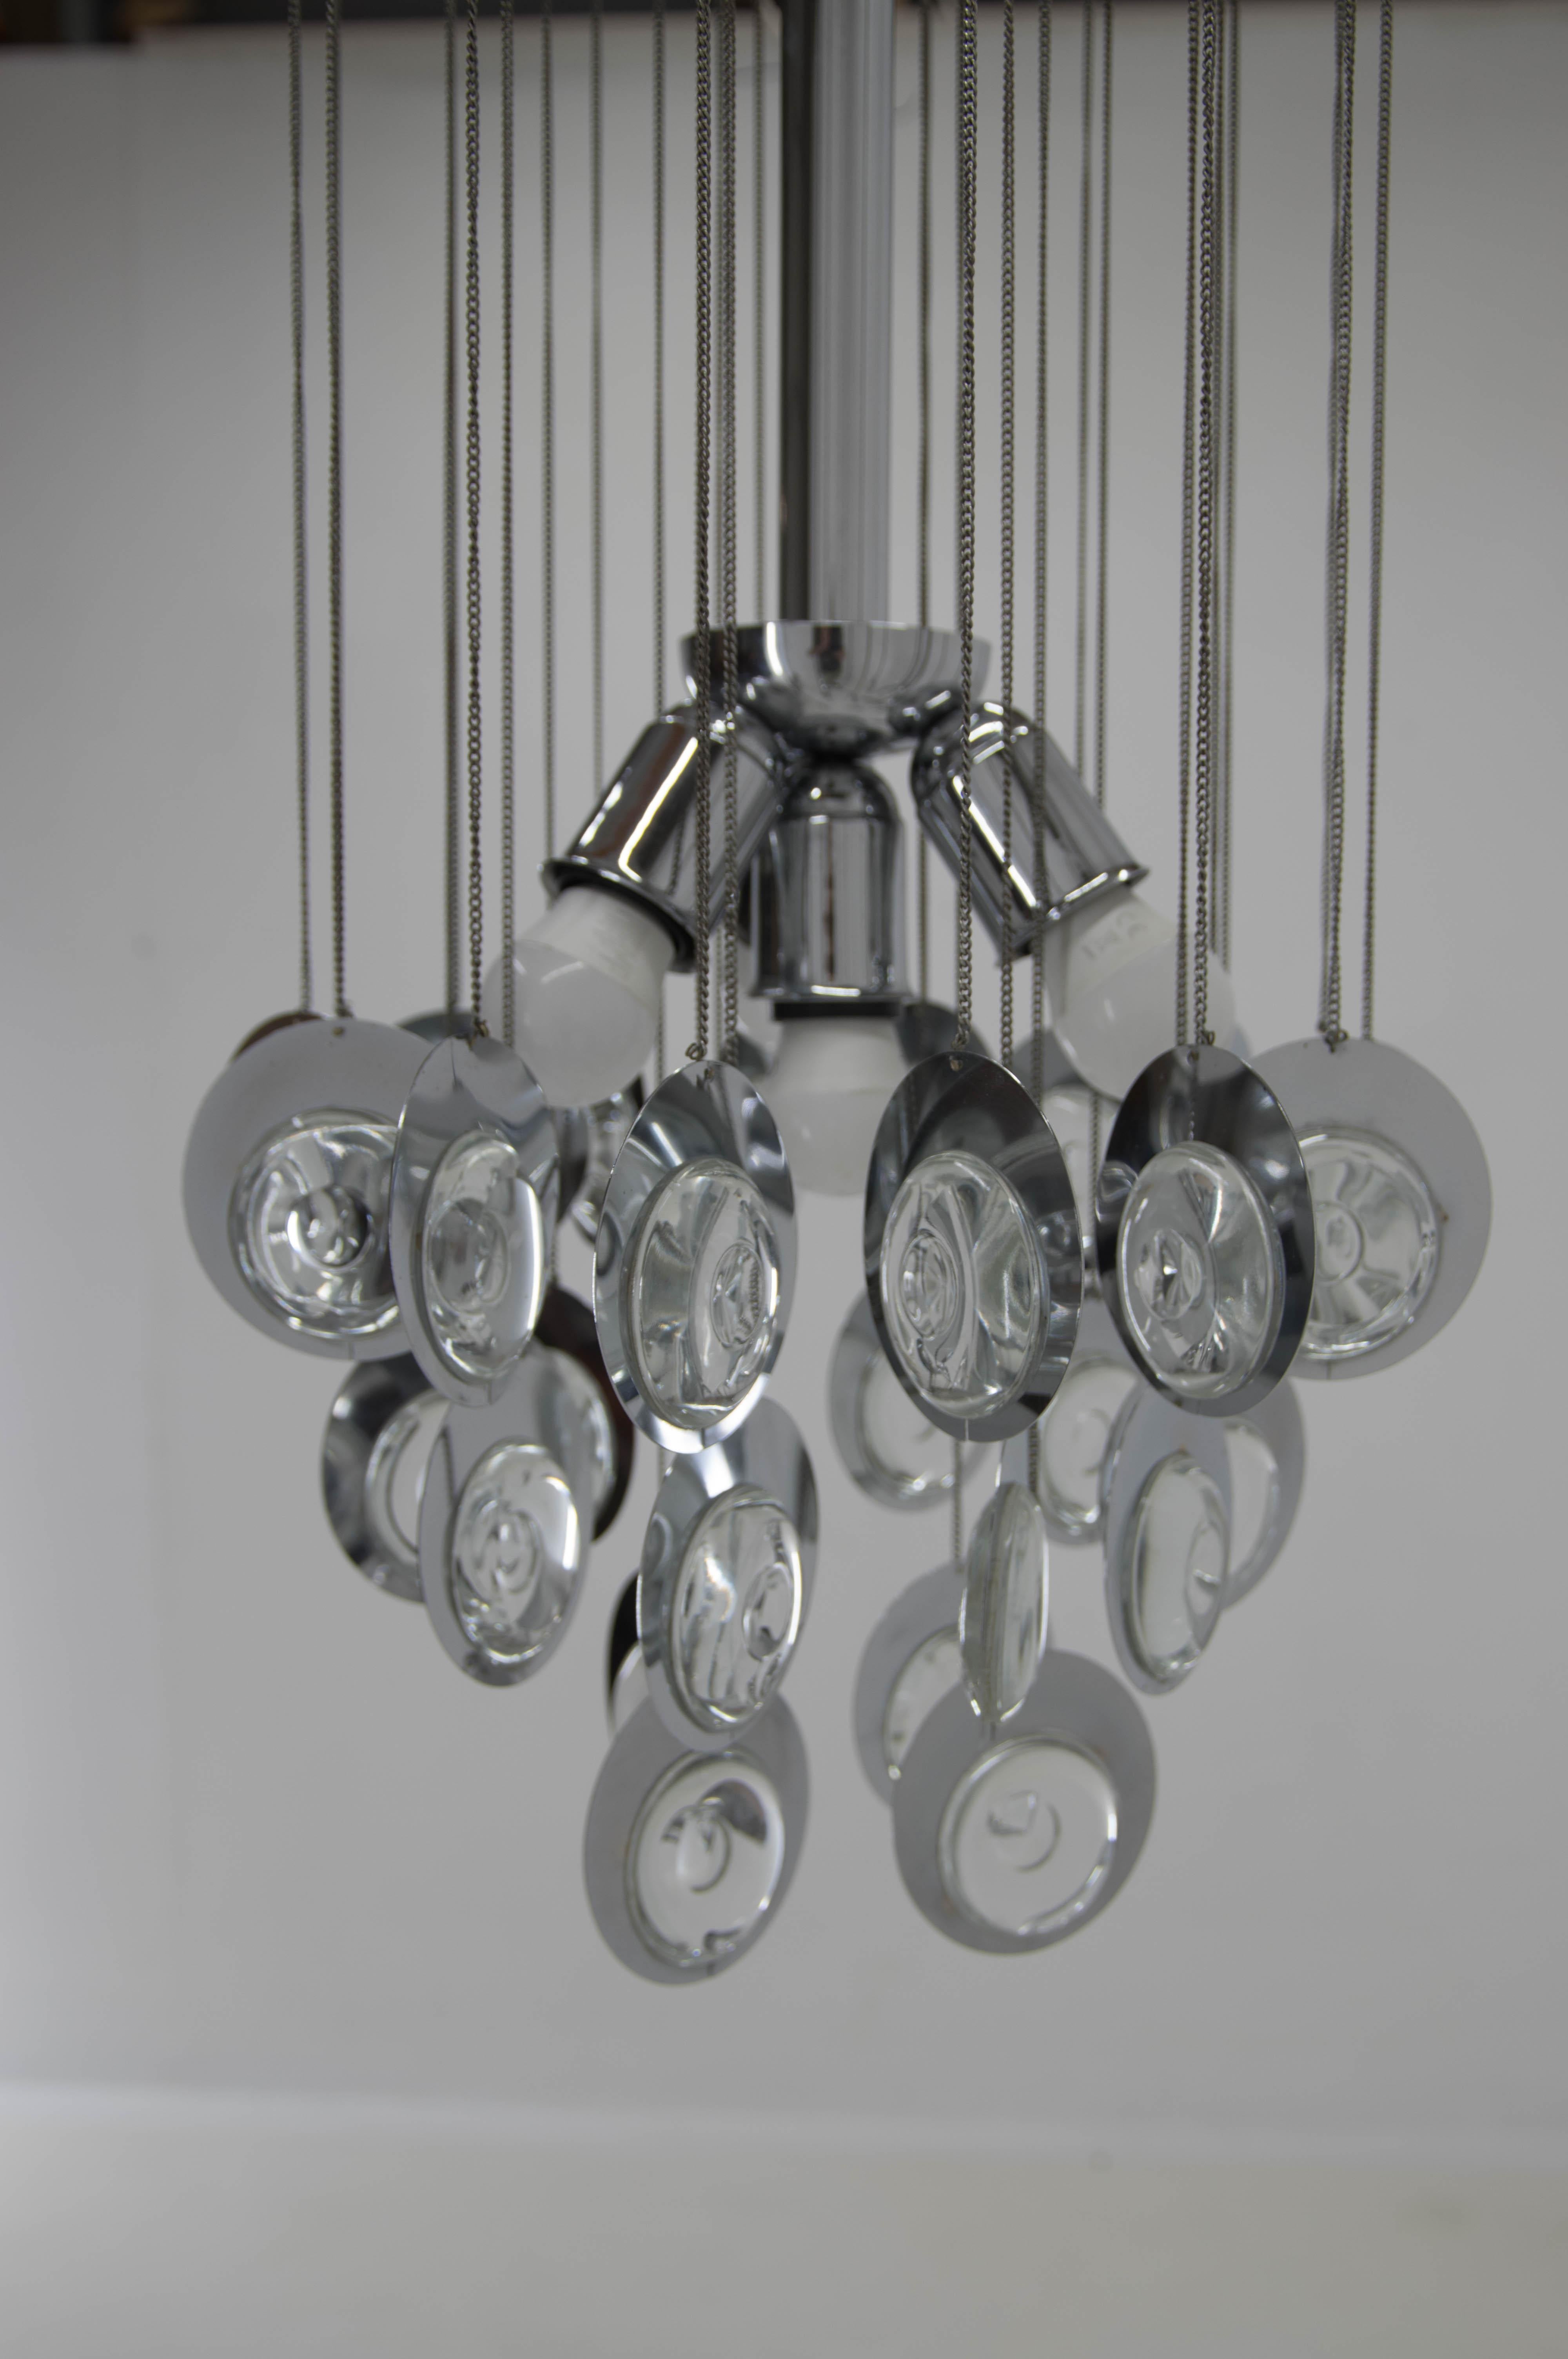 Glass and chrome pendant made in Italy in 1960s.
Very good condition, chrome with minimum age patina.
3x40W, E25-E27 bulb
US wiring compatible